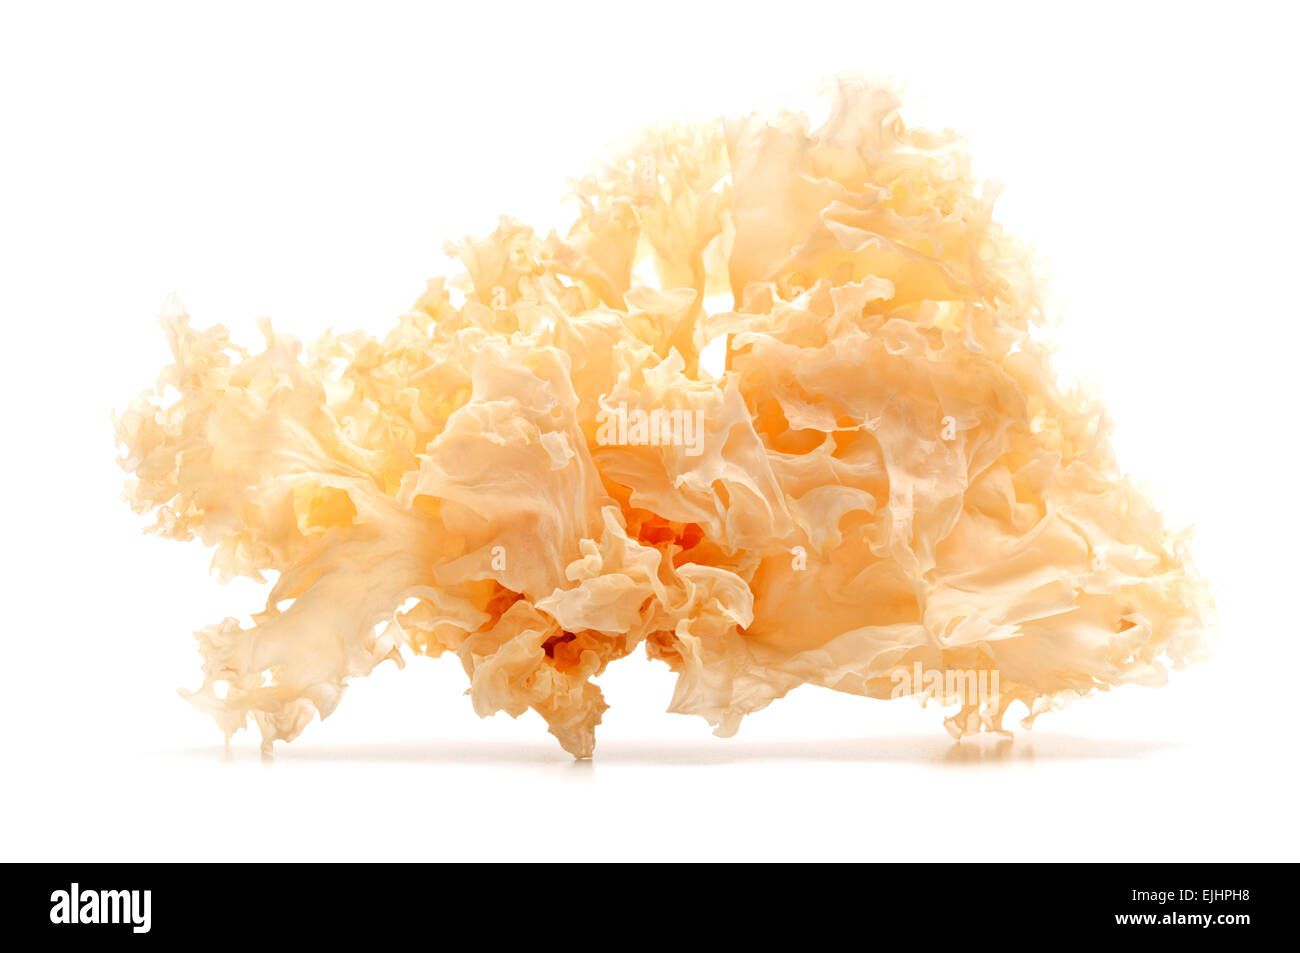 Dried snow fungus on a white background Stock Photo